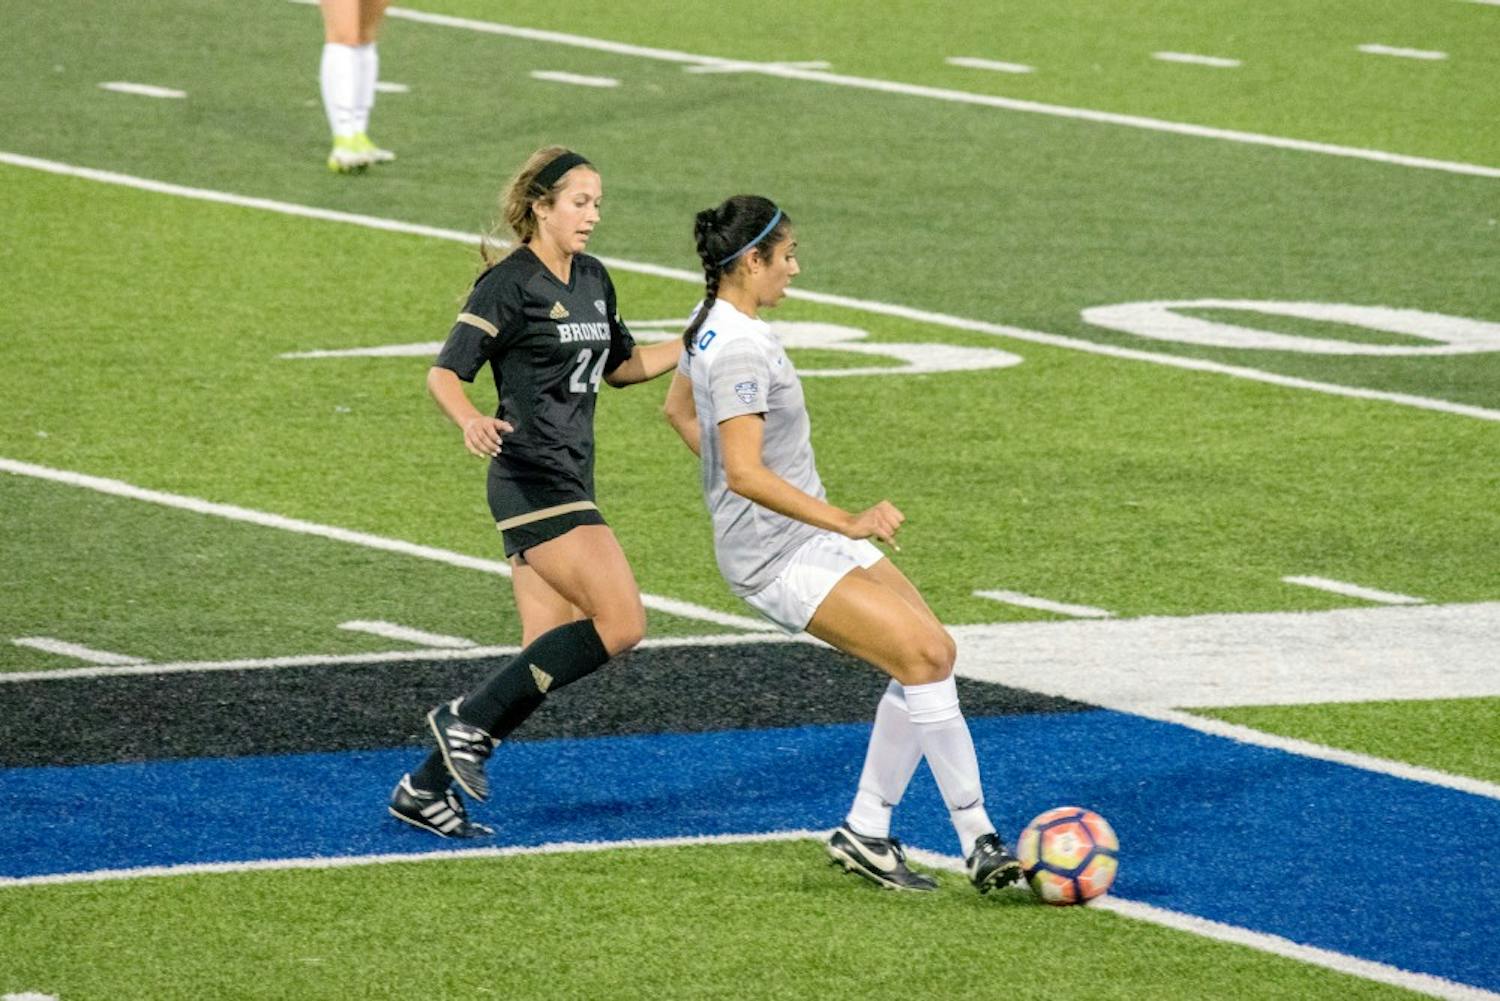 Sophomore defender Gurjenna Jandu tries to get ball control from the other team. The Bulls are looking to finish the season strong in their final five games.